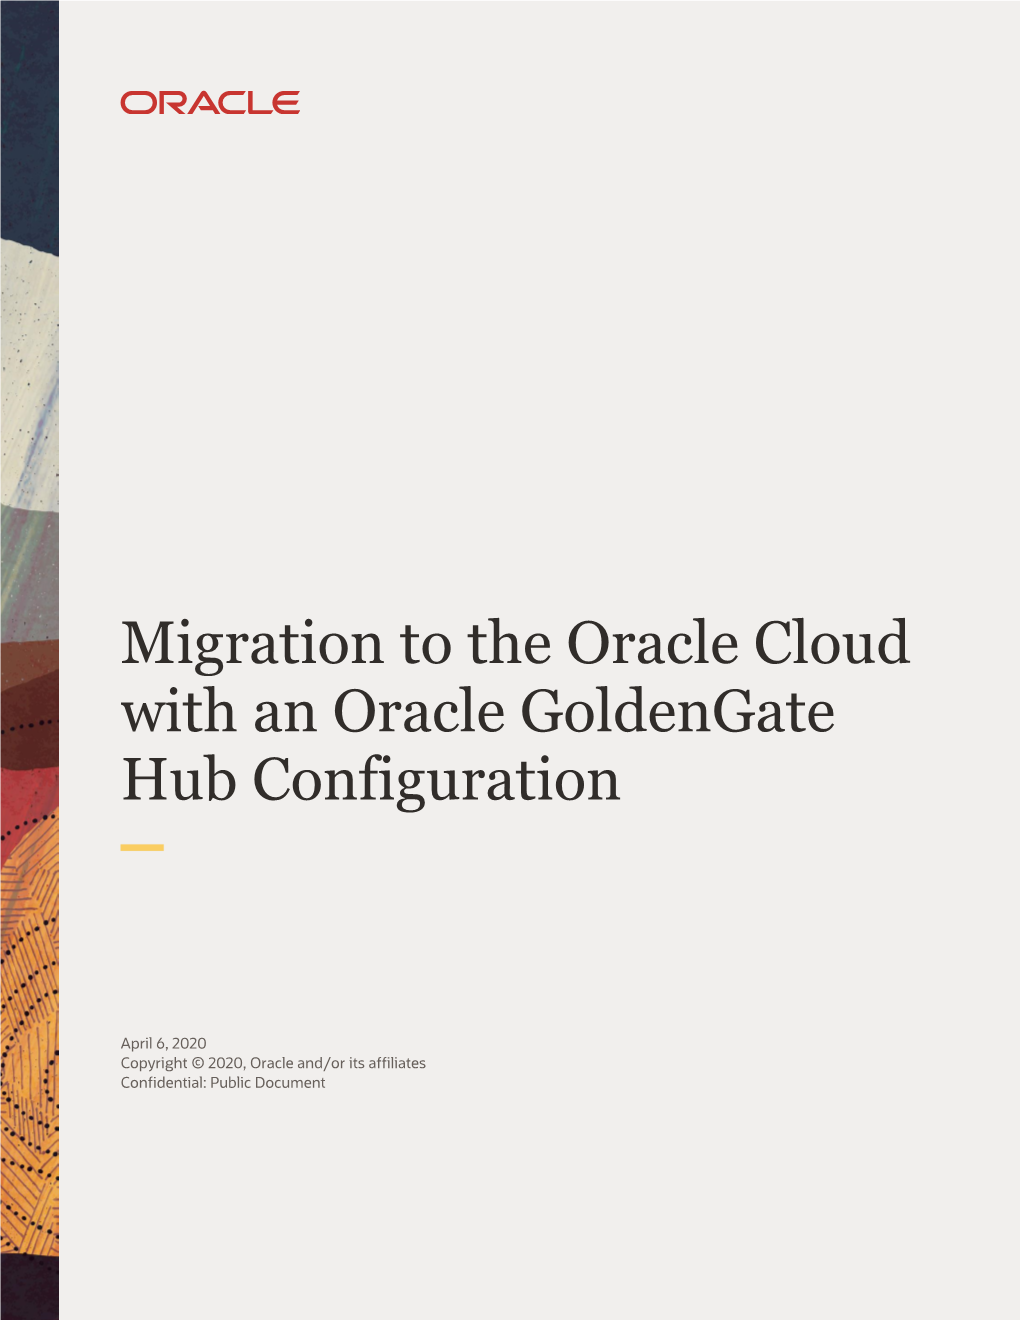 Migration to the Oracle Cloud with an Oracle Goldengate Hub Configuration